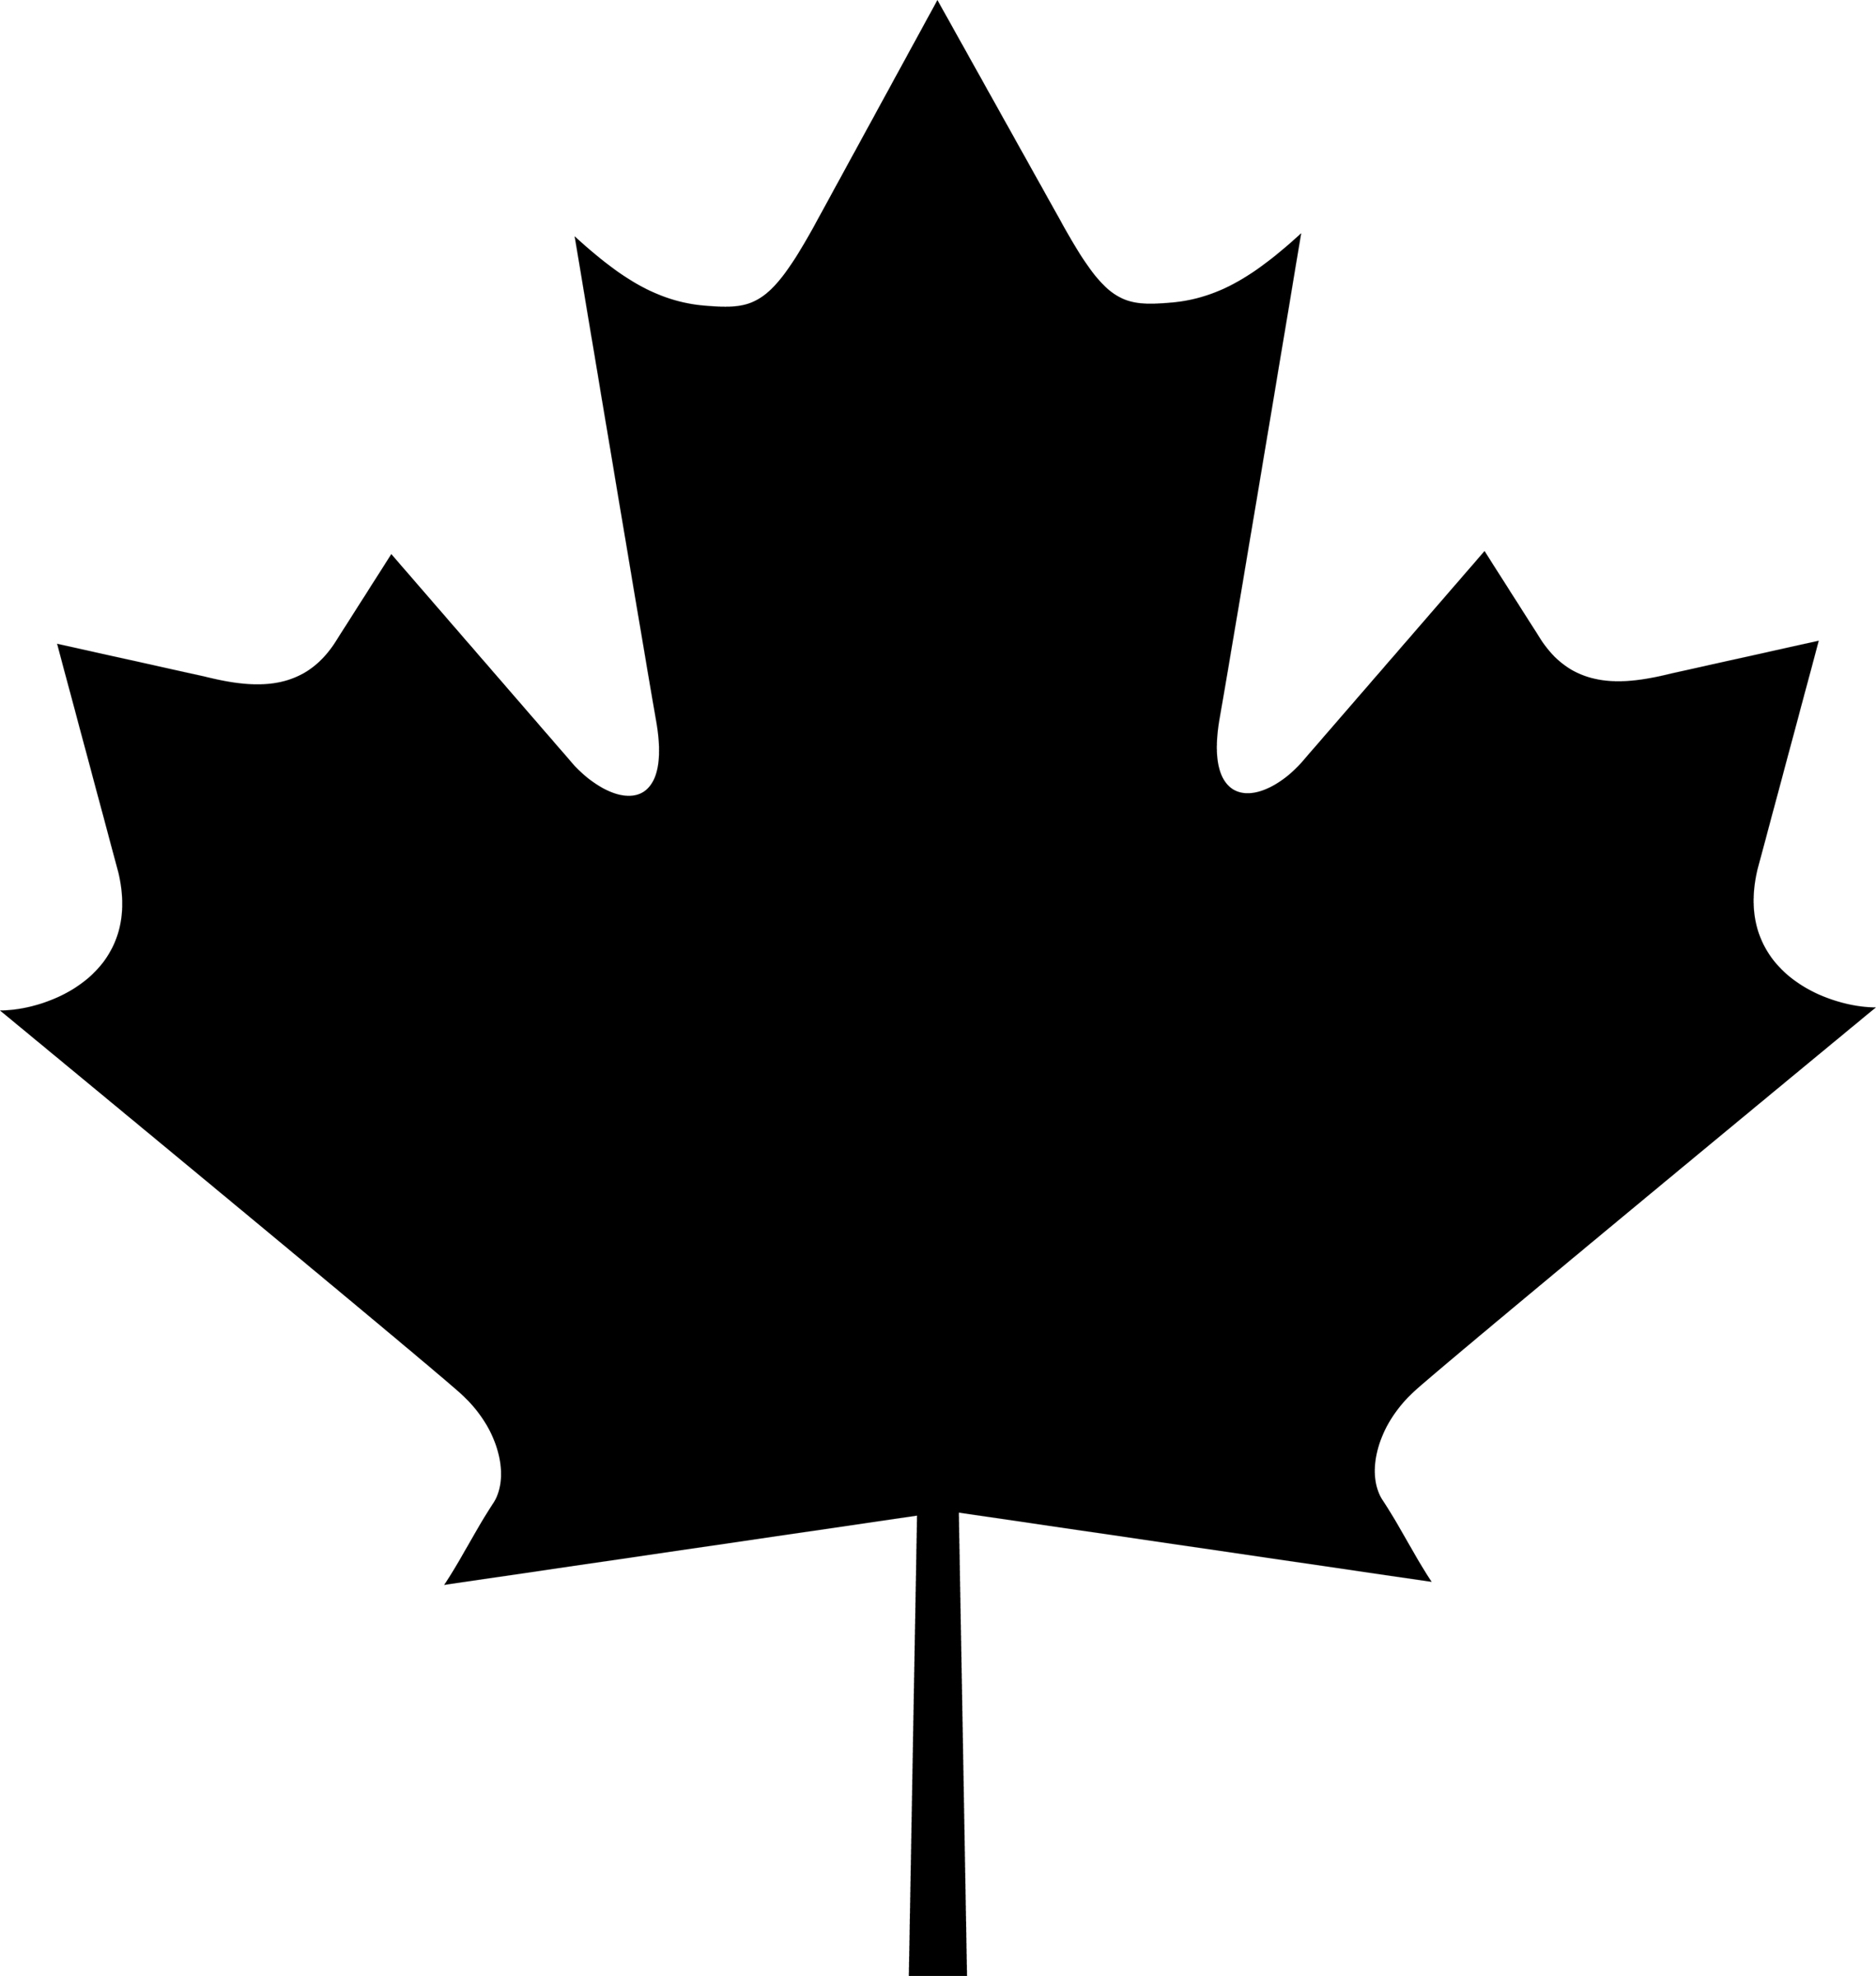 Maple Leaf Outline Vector - Gallery